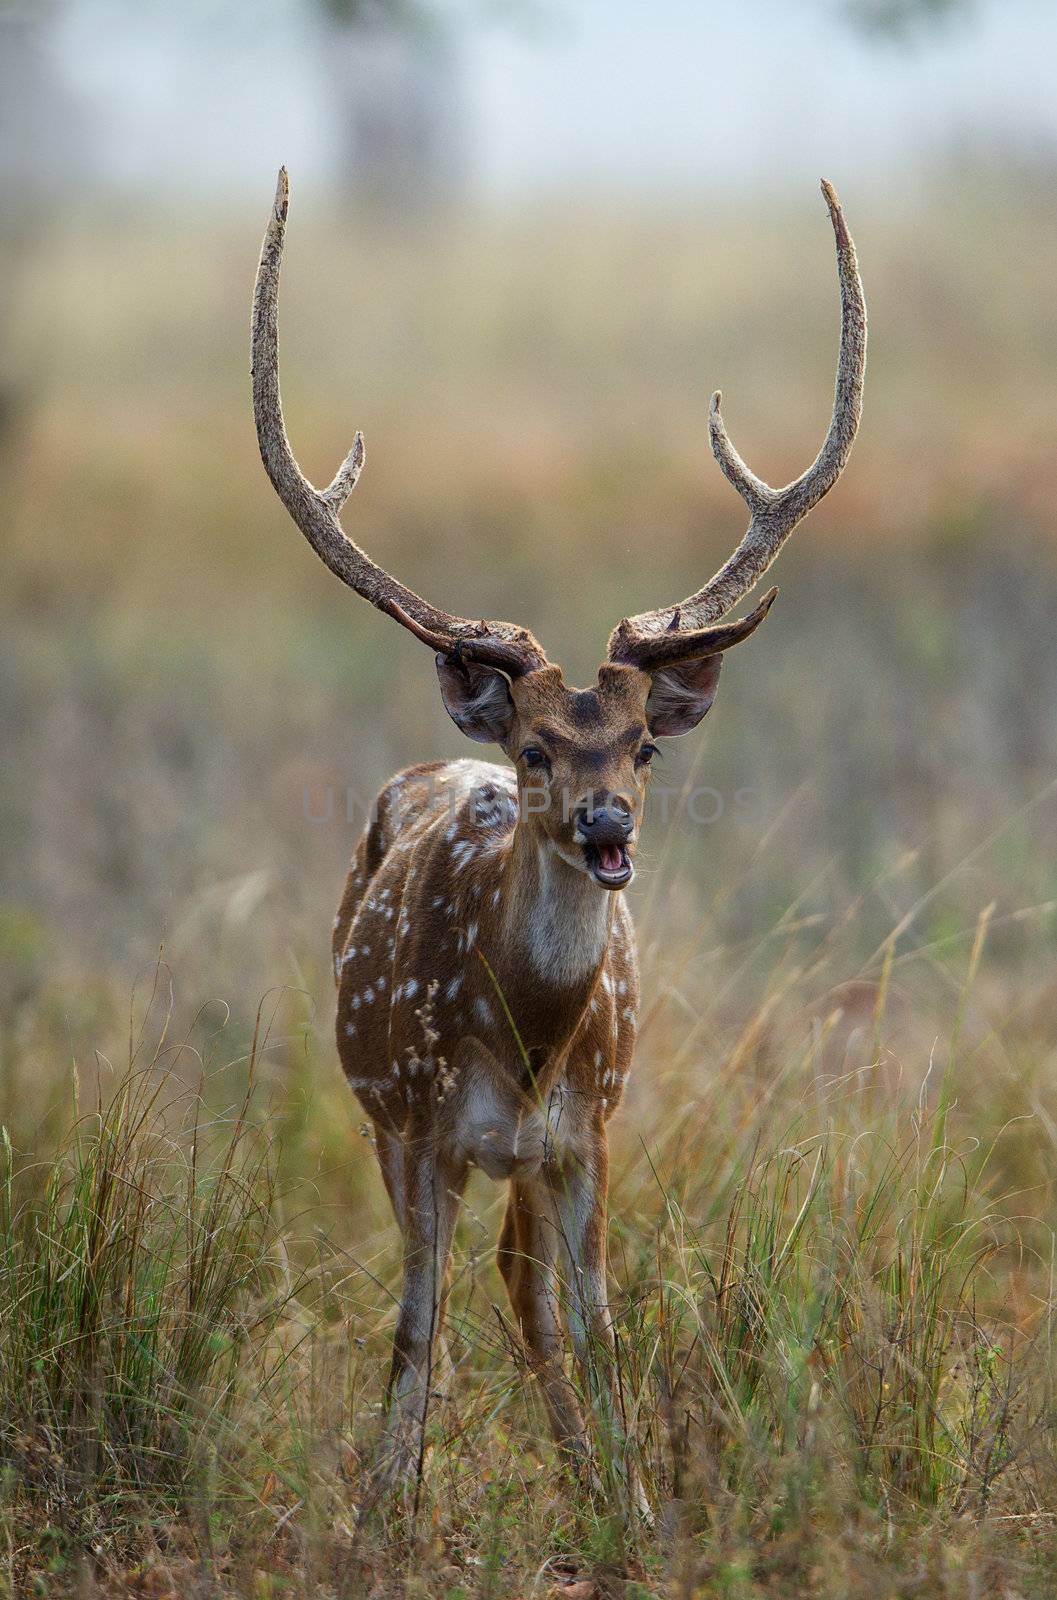 The chital or cheetal (Axis axis), also known as chital deer, spotted deer or axis deer is a deer which commonly inhabits wooded regions of Sri Lanka, Nepal, Bangladesh and India, and on the Veliki Brijun Island in the Brijuni Archipelago of the Istrian Peninsula in Croatia. 